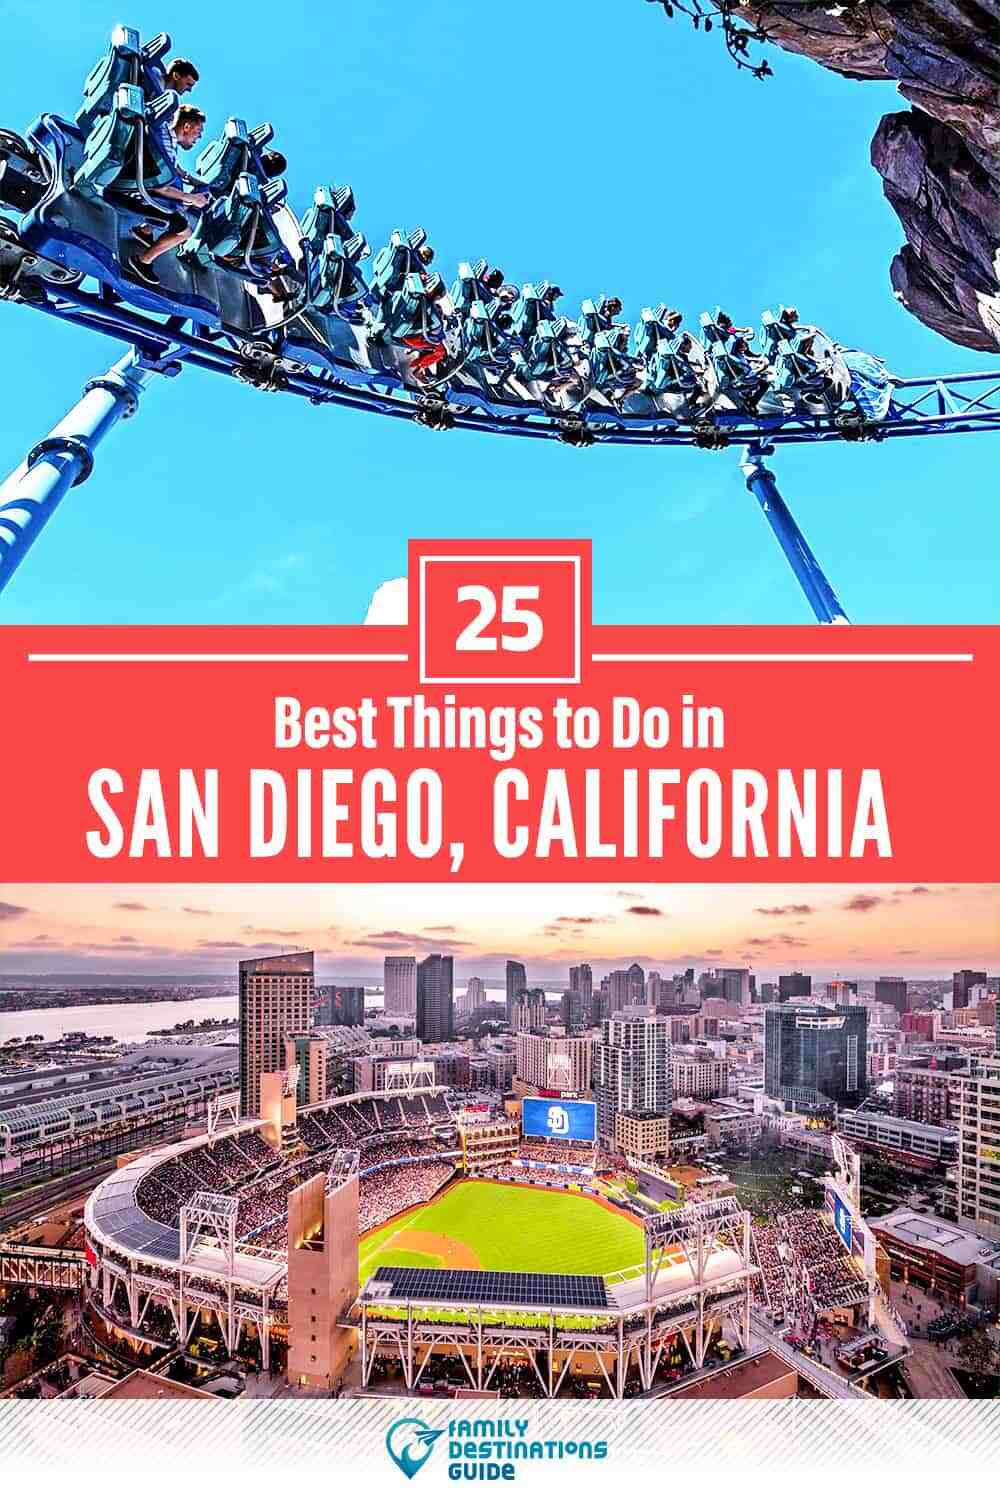 What should I not miss in San Diego?